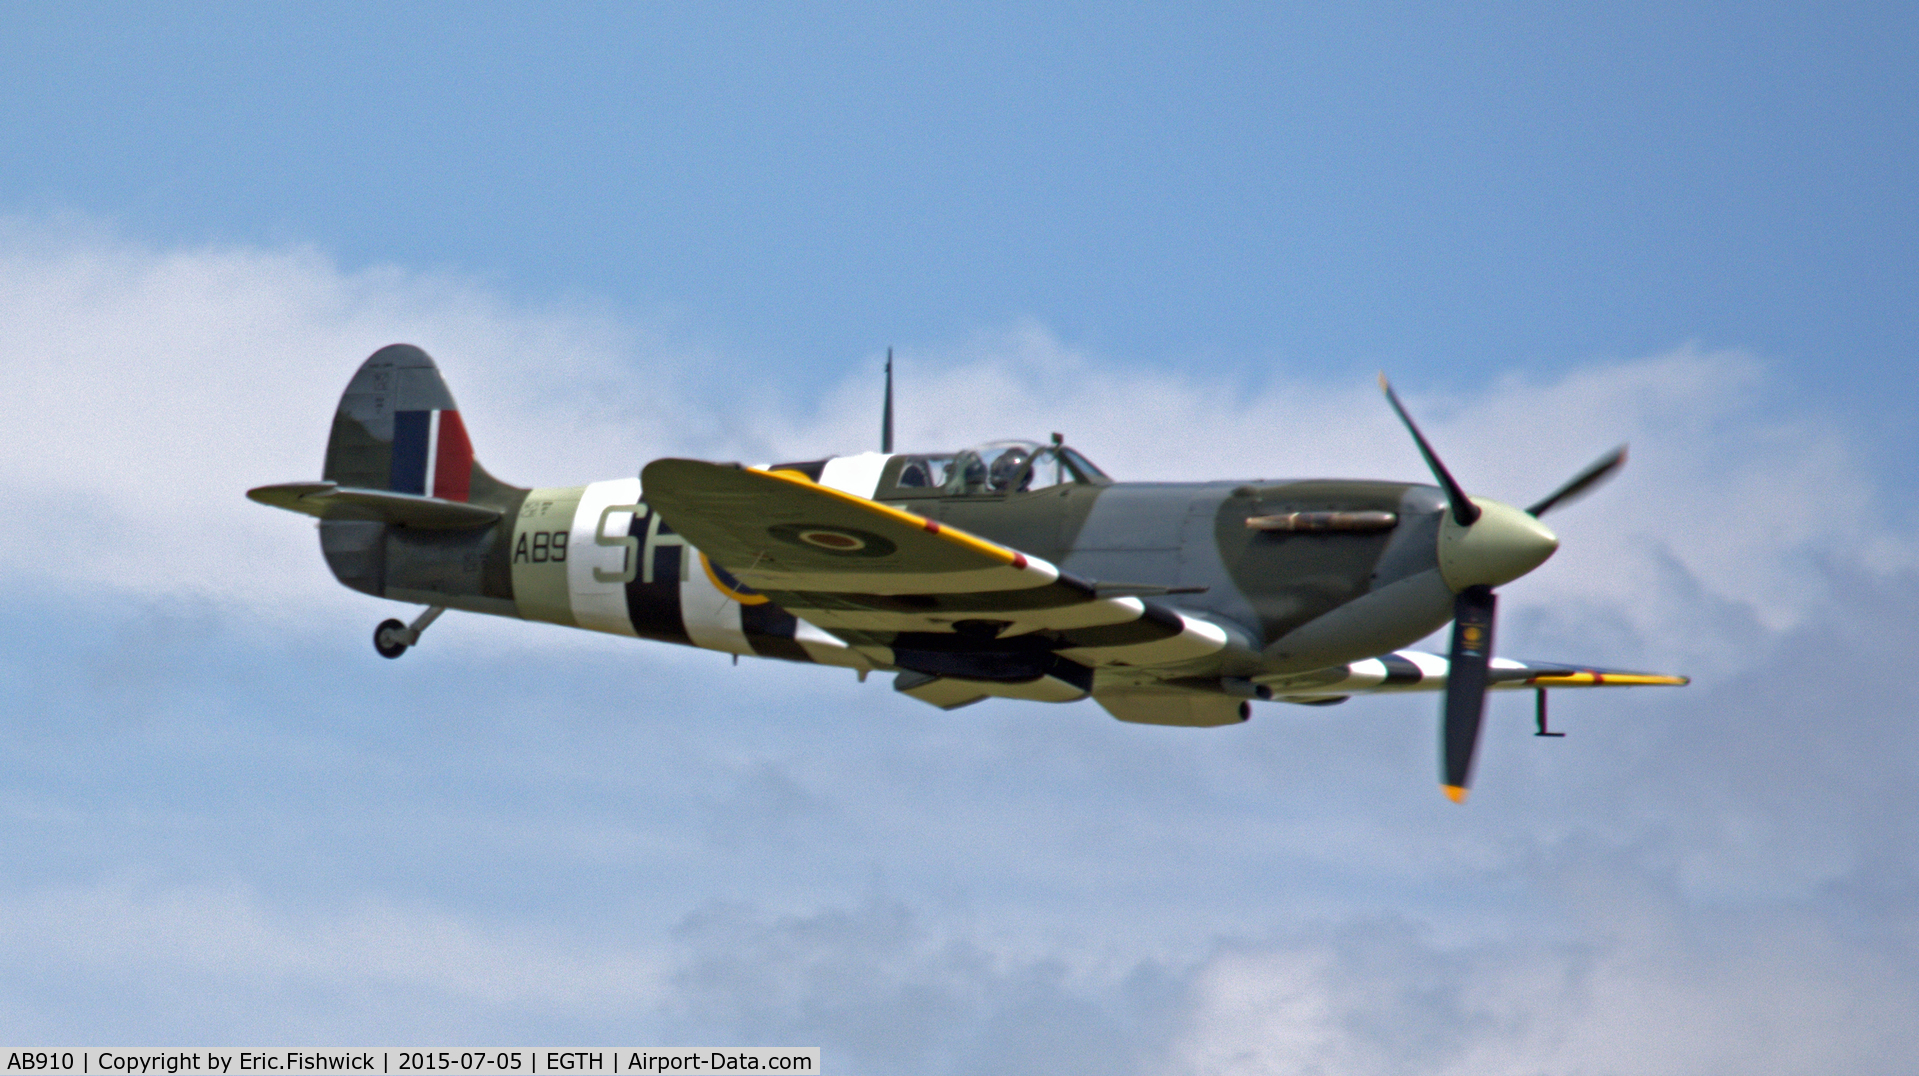 AB910, Supermarine 349 Spitfire LF.Vb C/N CBAF.1061, 42. AB910 (B.B.M.F.) in superb display mode at the Shuttleworth Military Pagent Airshow, July 2015.